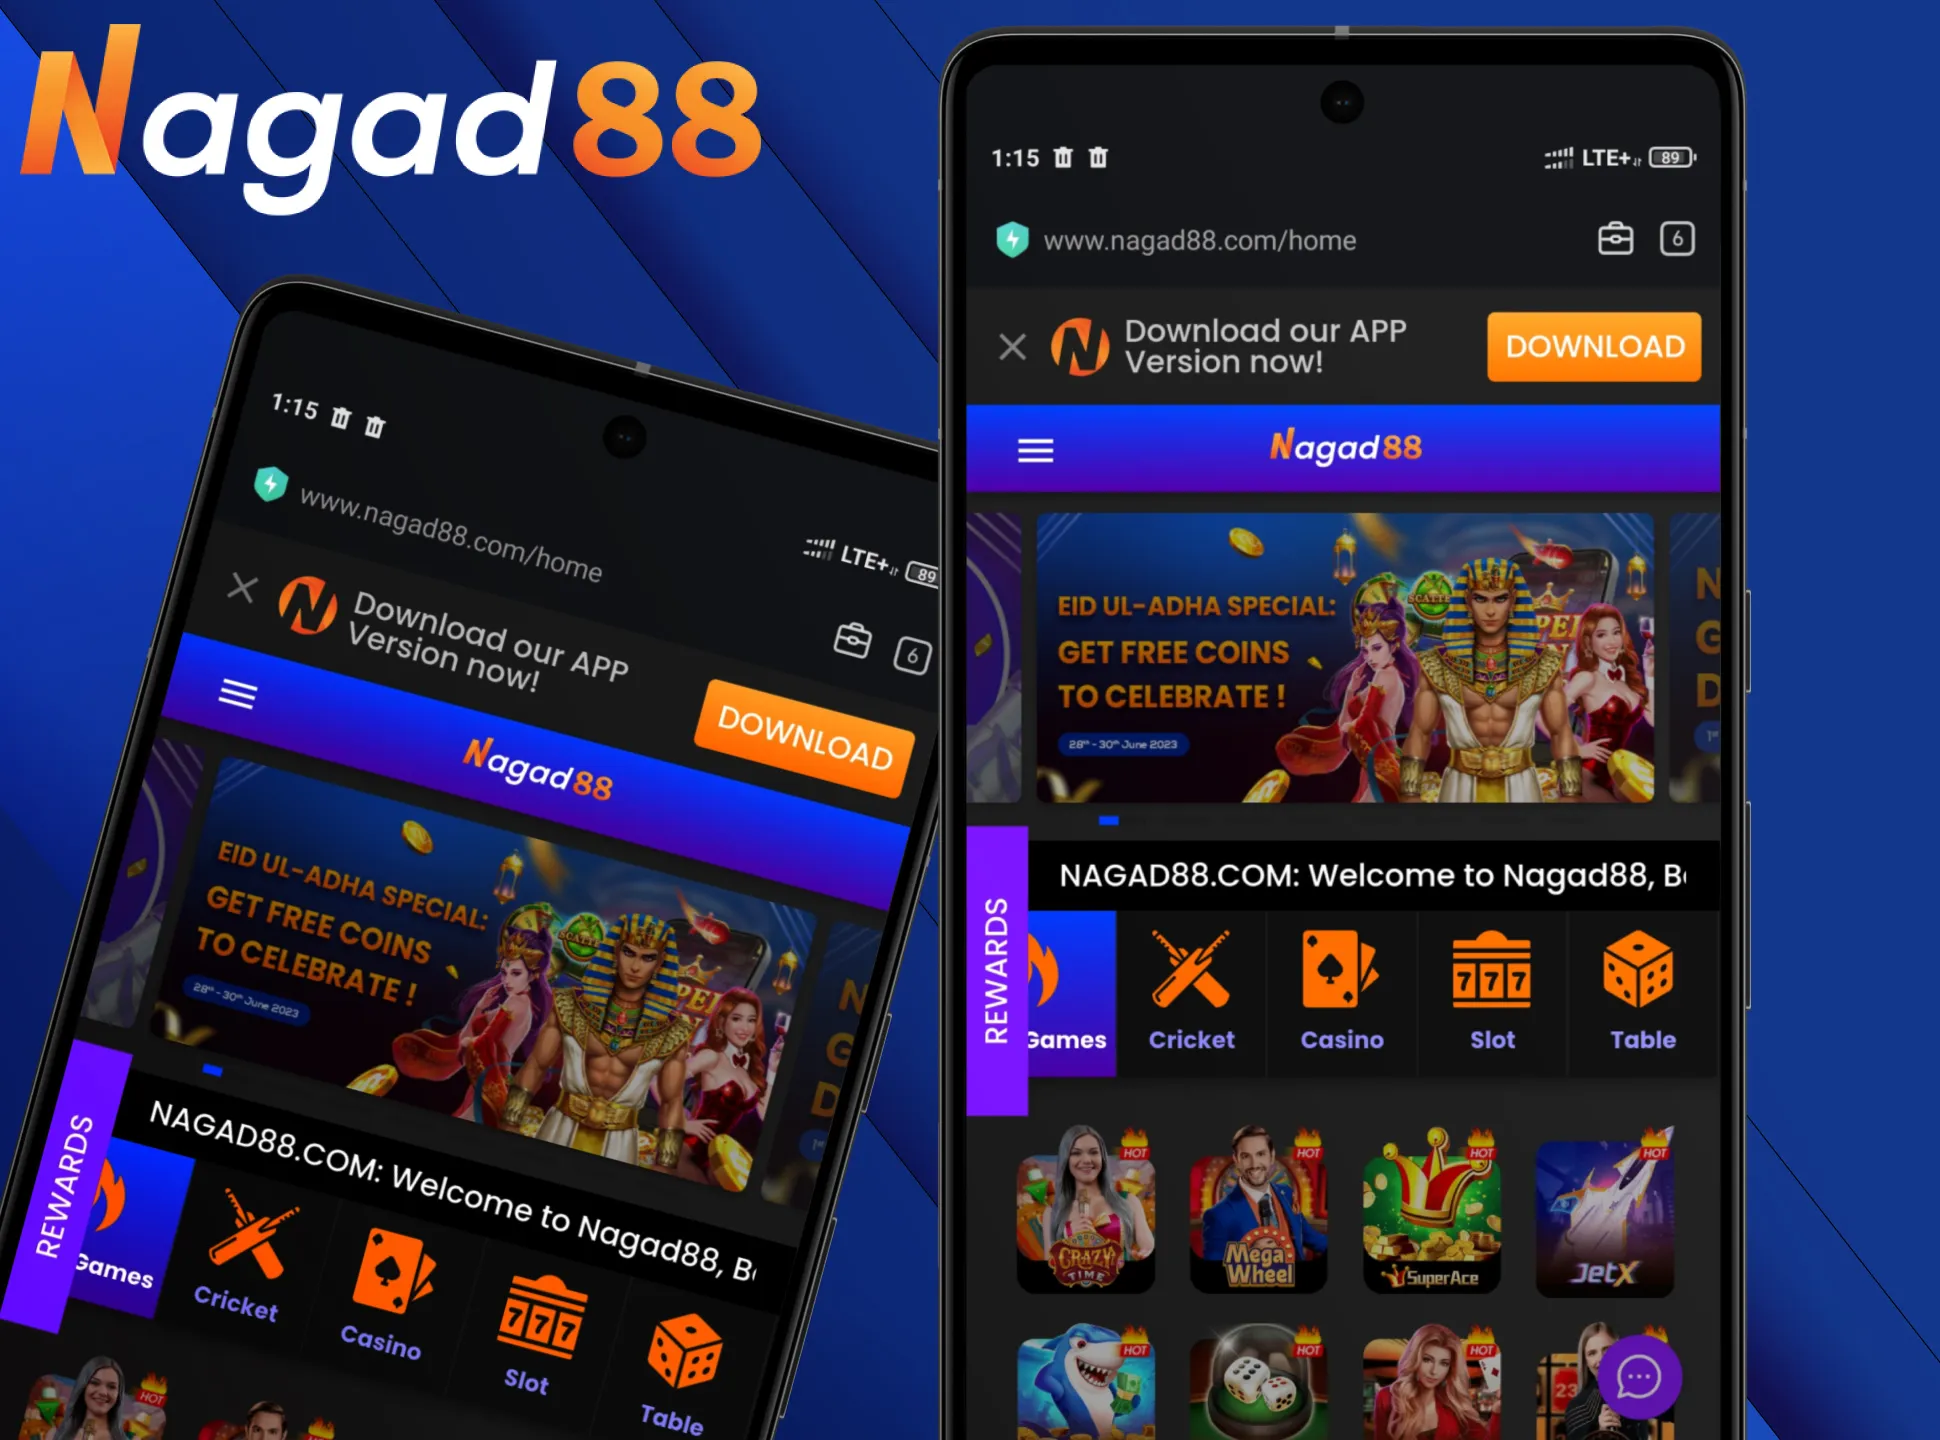 Mobile version of Nagad88 is totally similar to the website.